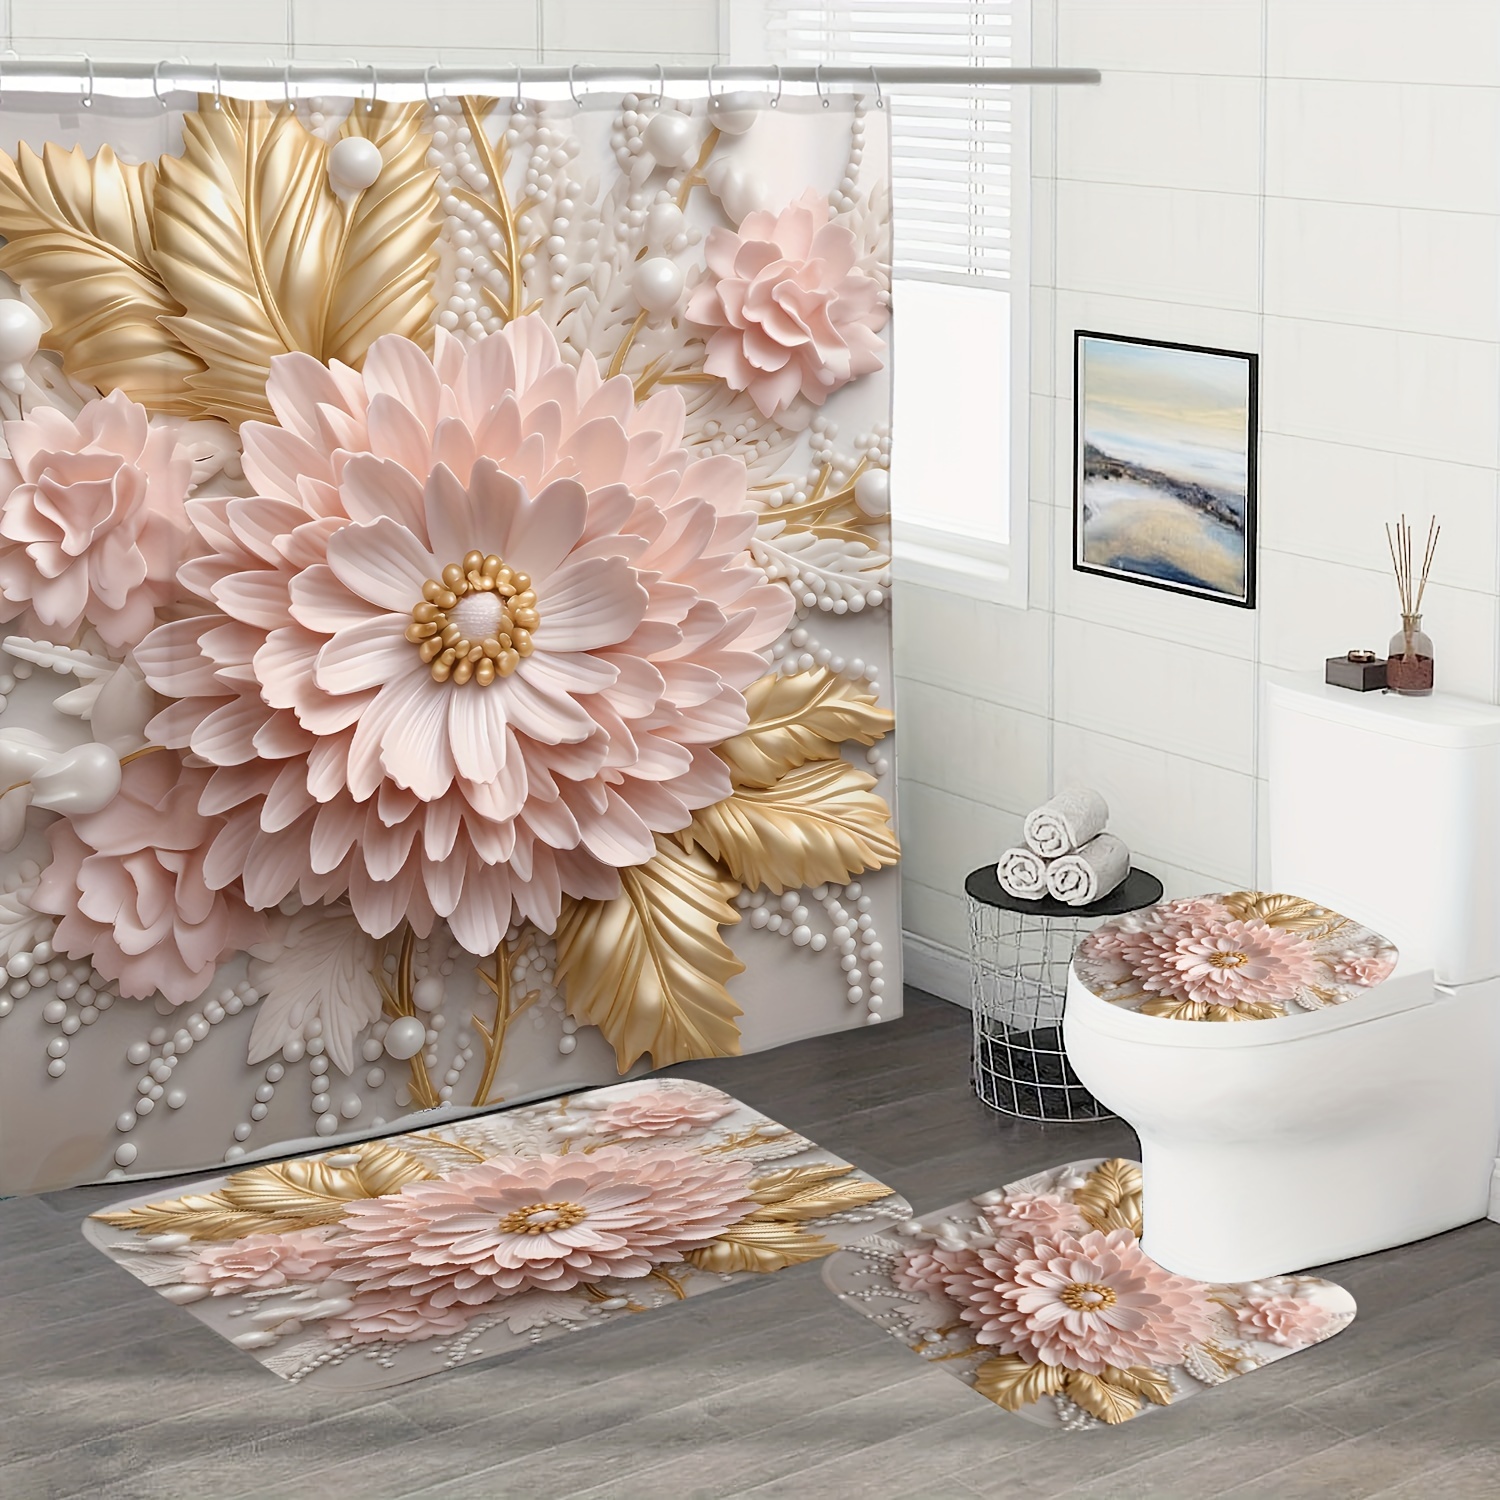 

3d Floral Waterproof Shower Curtain Set With Matching Bath Mat & Toilet Lid Cover - Modern Home Bathroom Decor, Includes 12 Hooks, Non-bleach Polyester, 72x72 Inches - Choose 1/3/4 Pcs Piece